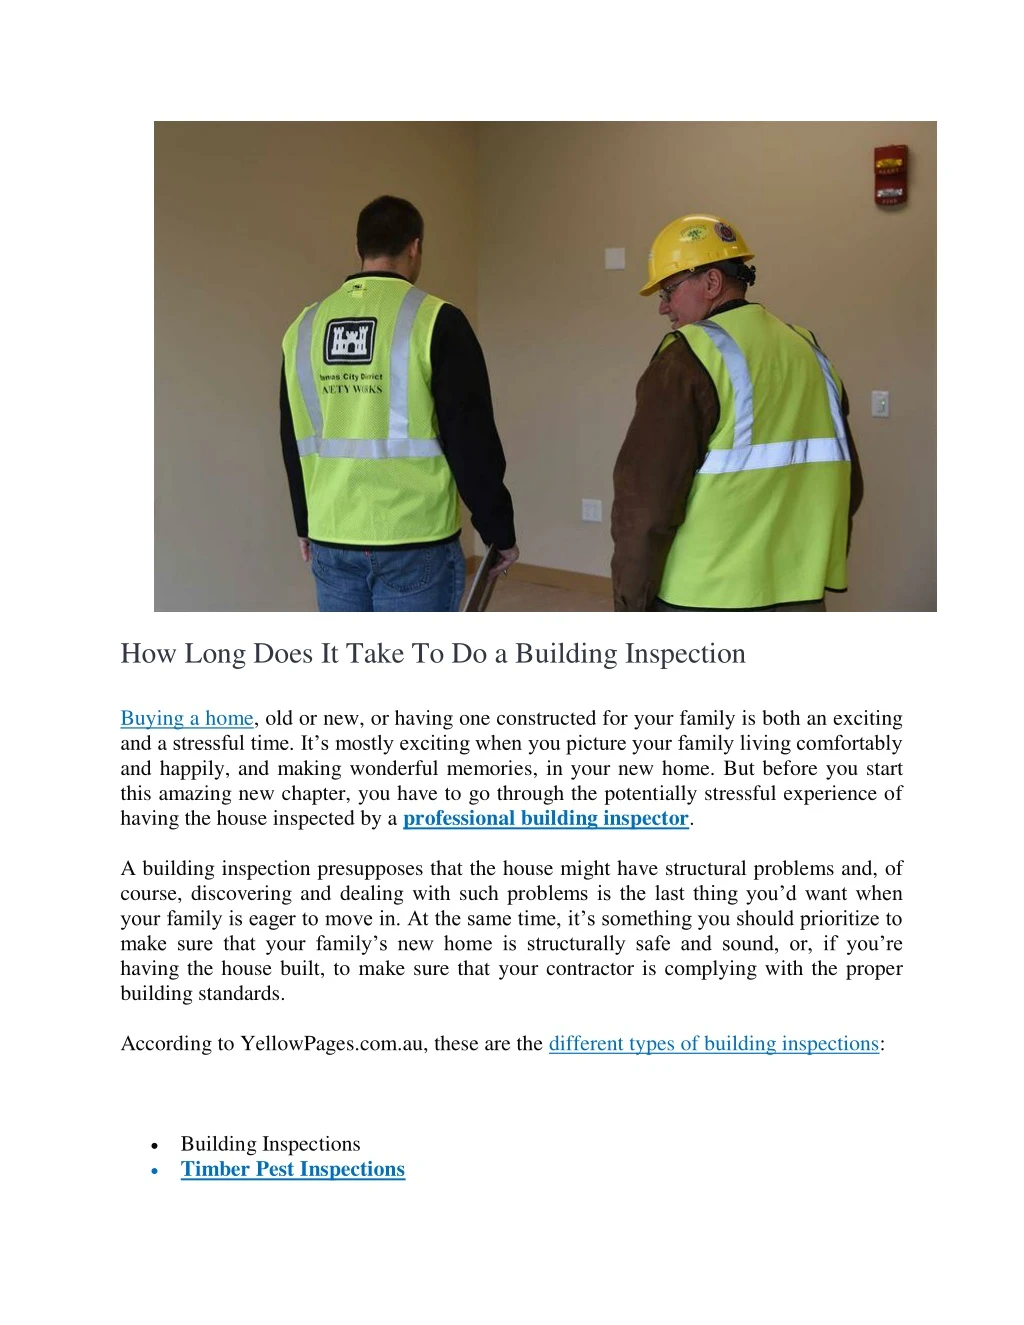 how long does it take to do a building inspection